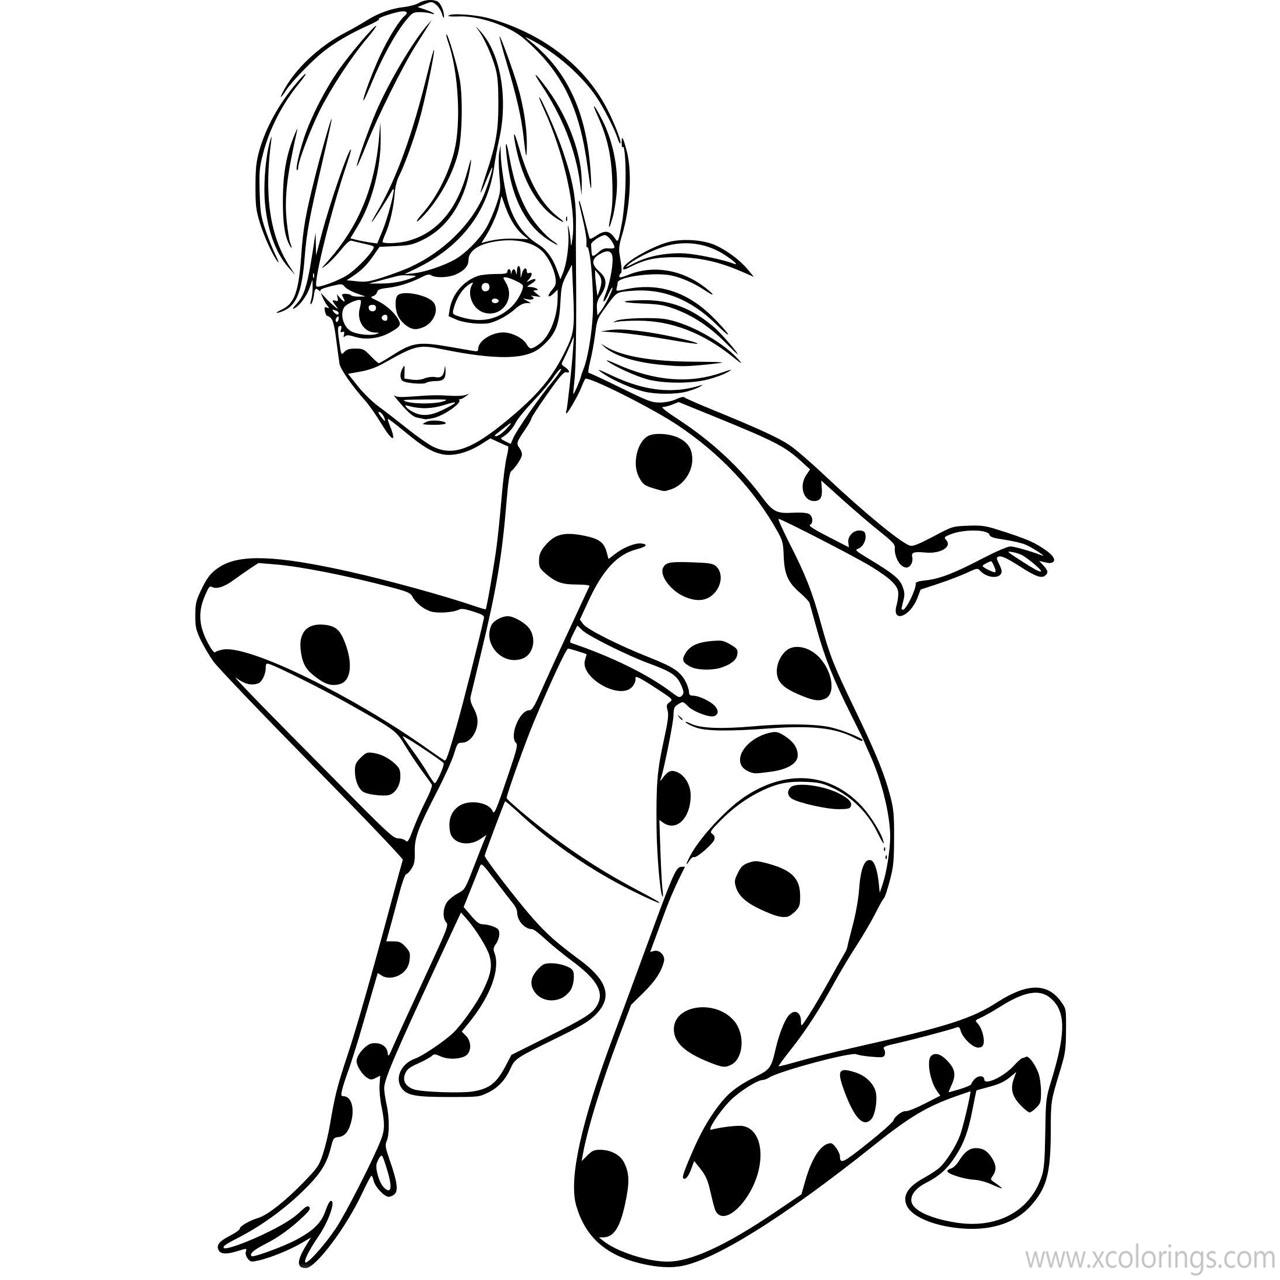 Free Miraculous Ladybug is Ready to Fight Coloring Pages printable